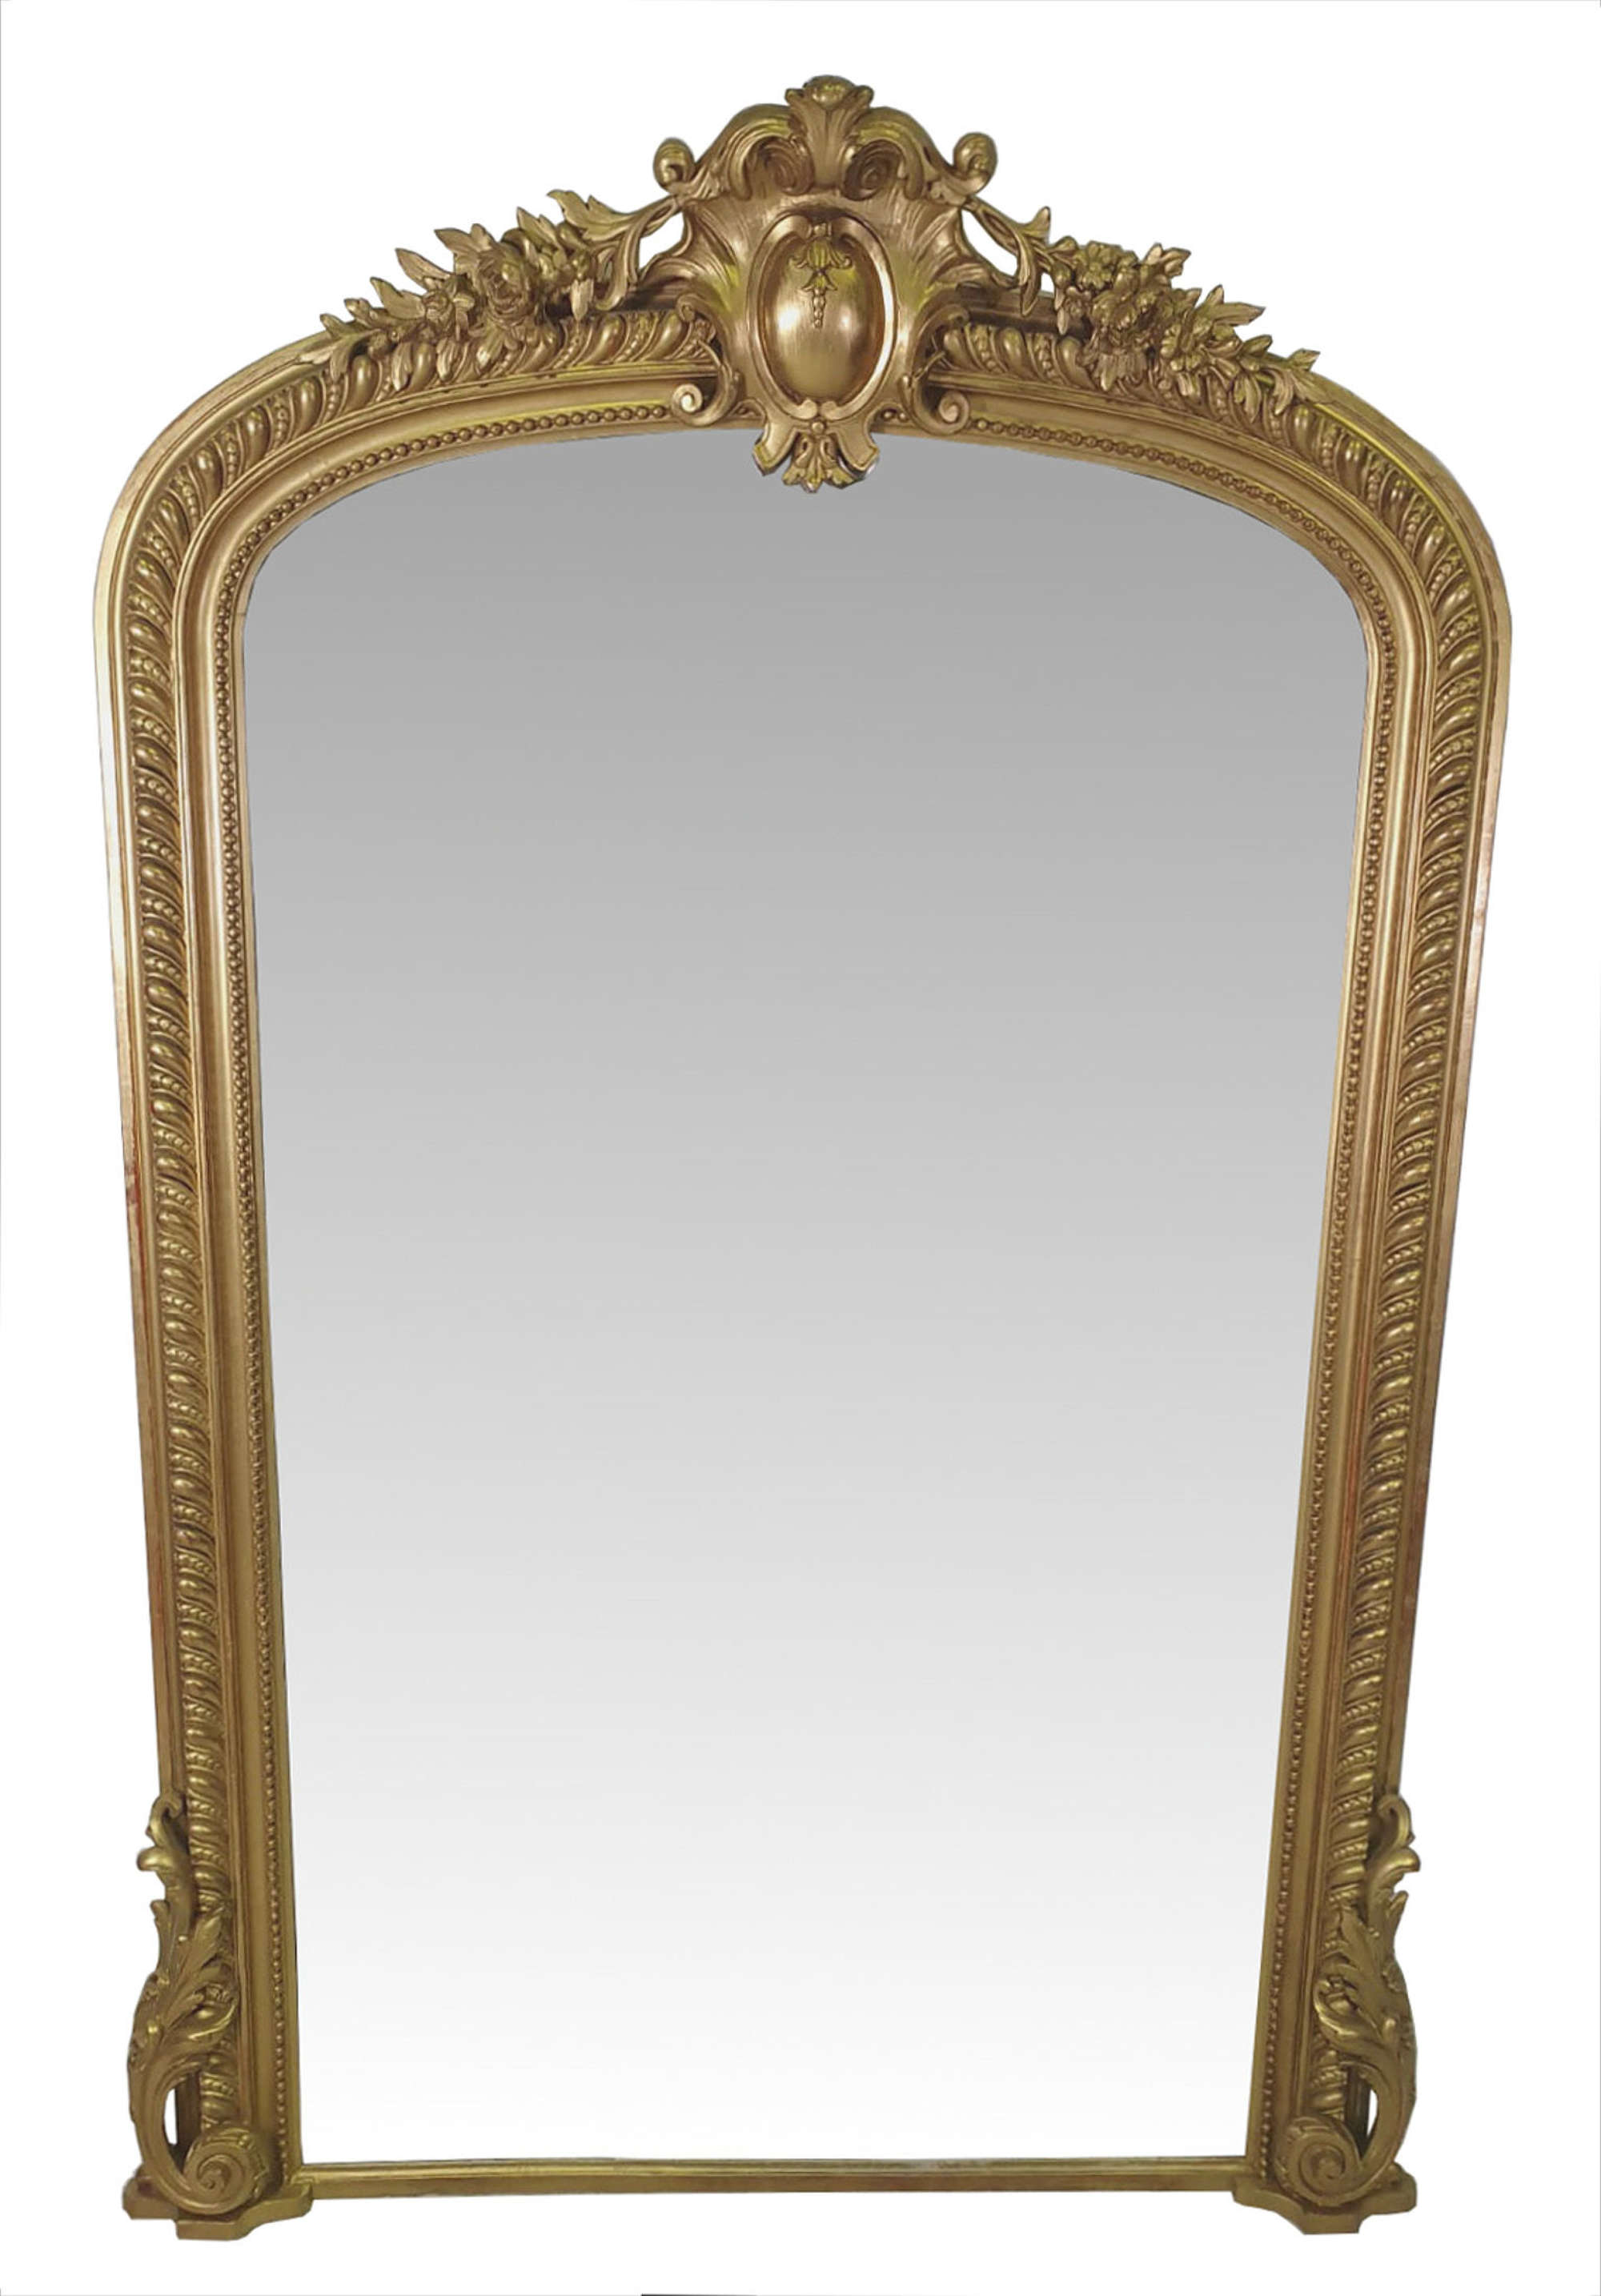 19th Century Tall Narrow Giltwood Antique Overmantle Mirror